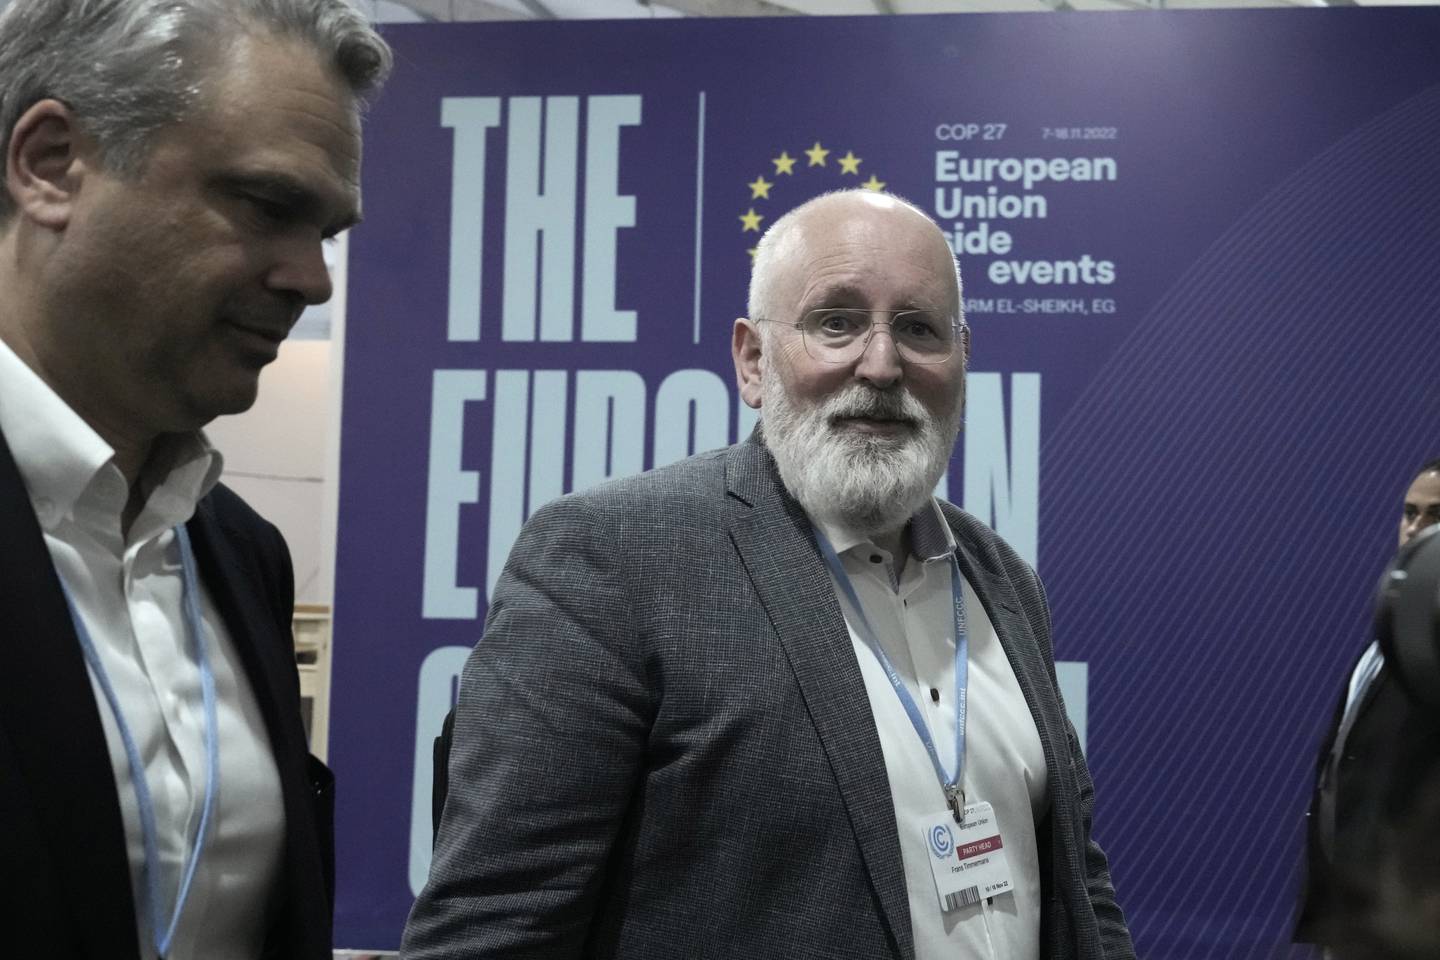 EU climate chief Frans Timmermans at the Cop27 summit in Egypt. AP